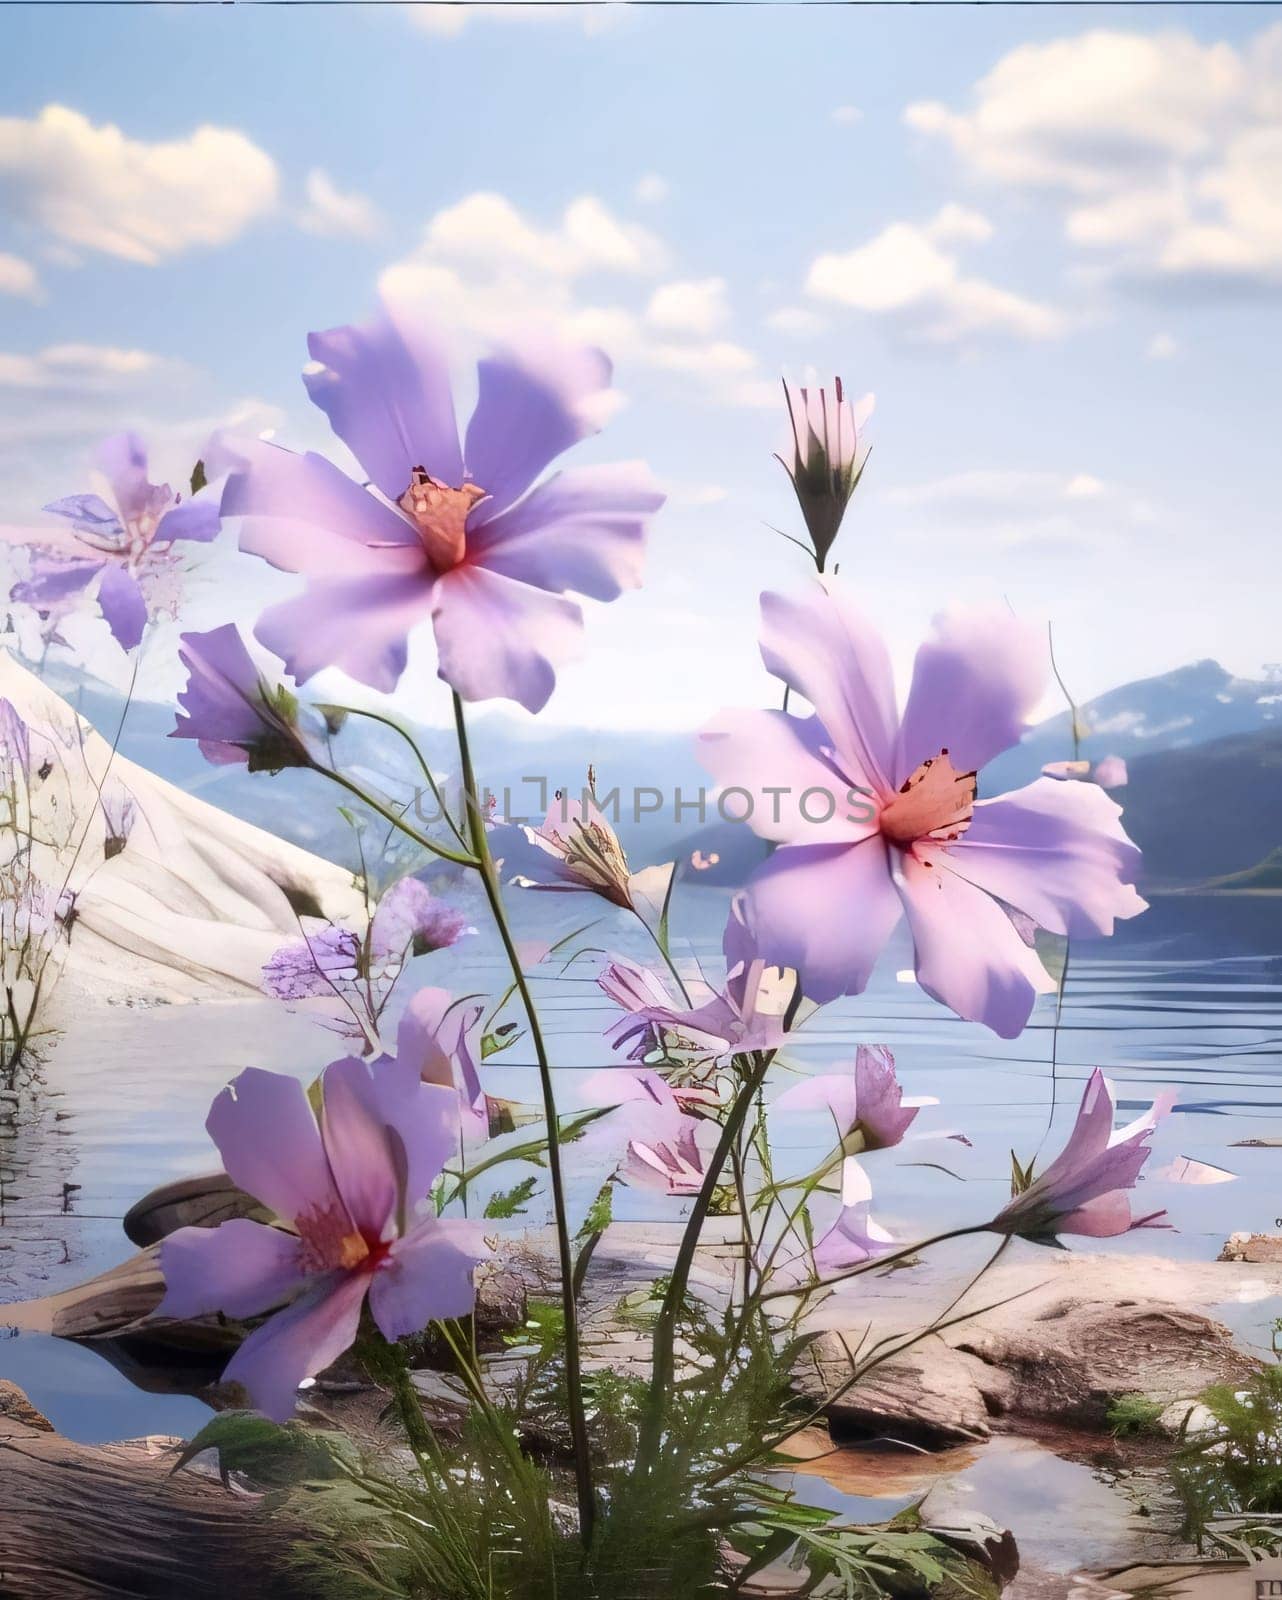 Pink flowers by the lake, with mountains in the background. Flowering flowers, a symbol of spring, new life. A joyful time of nature waking up to life.